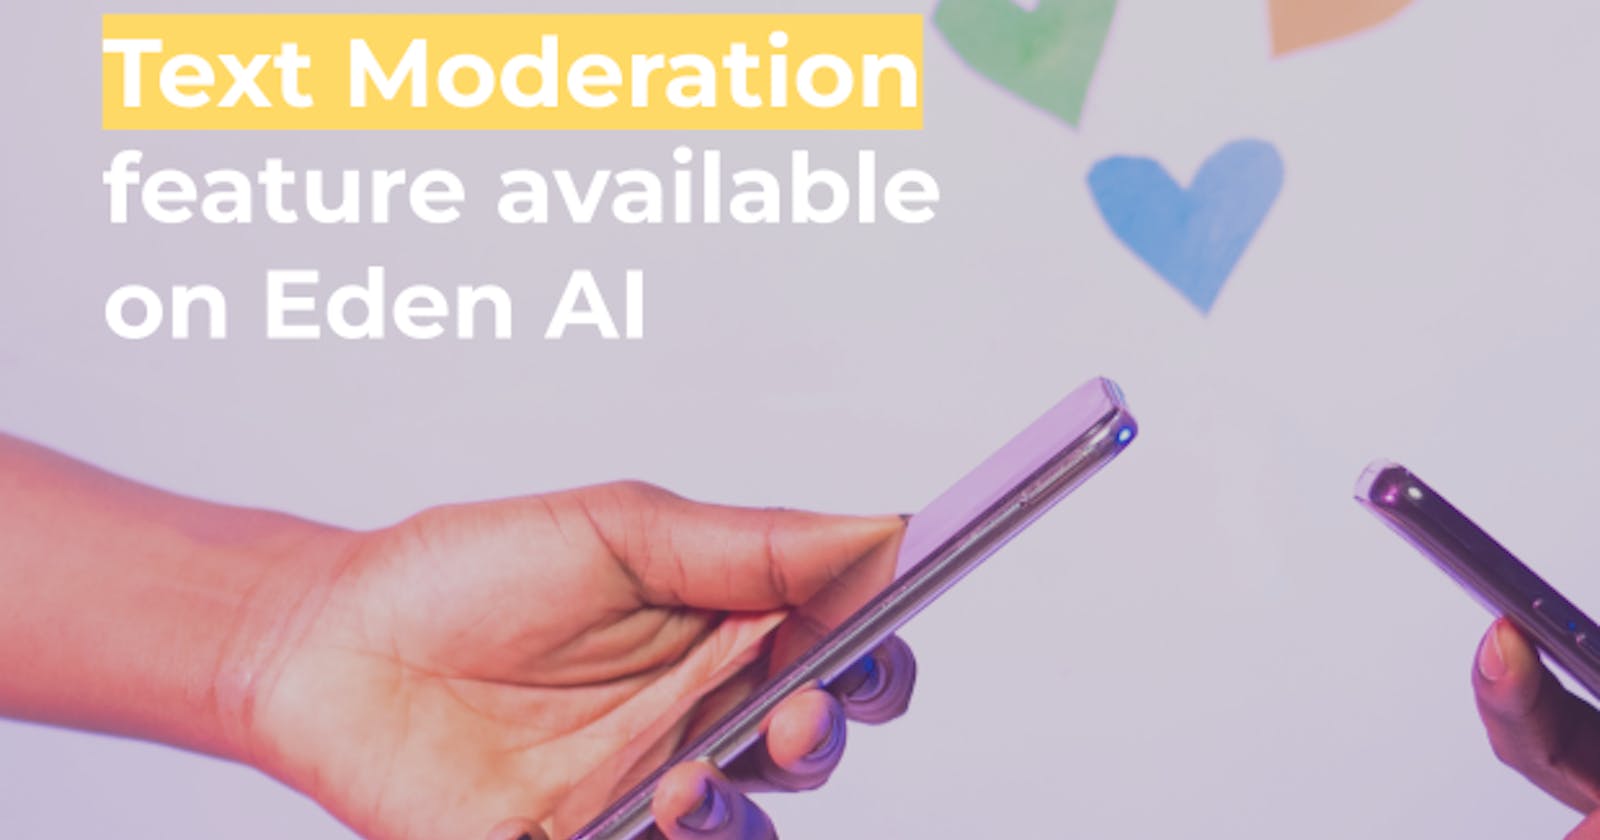 NEW: Text Moderation feature available on Eden AI